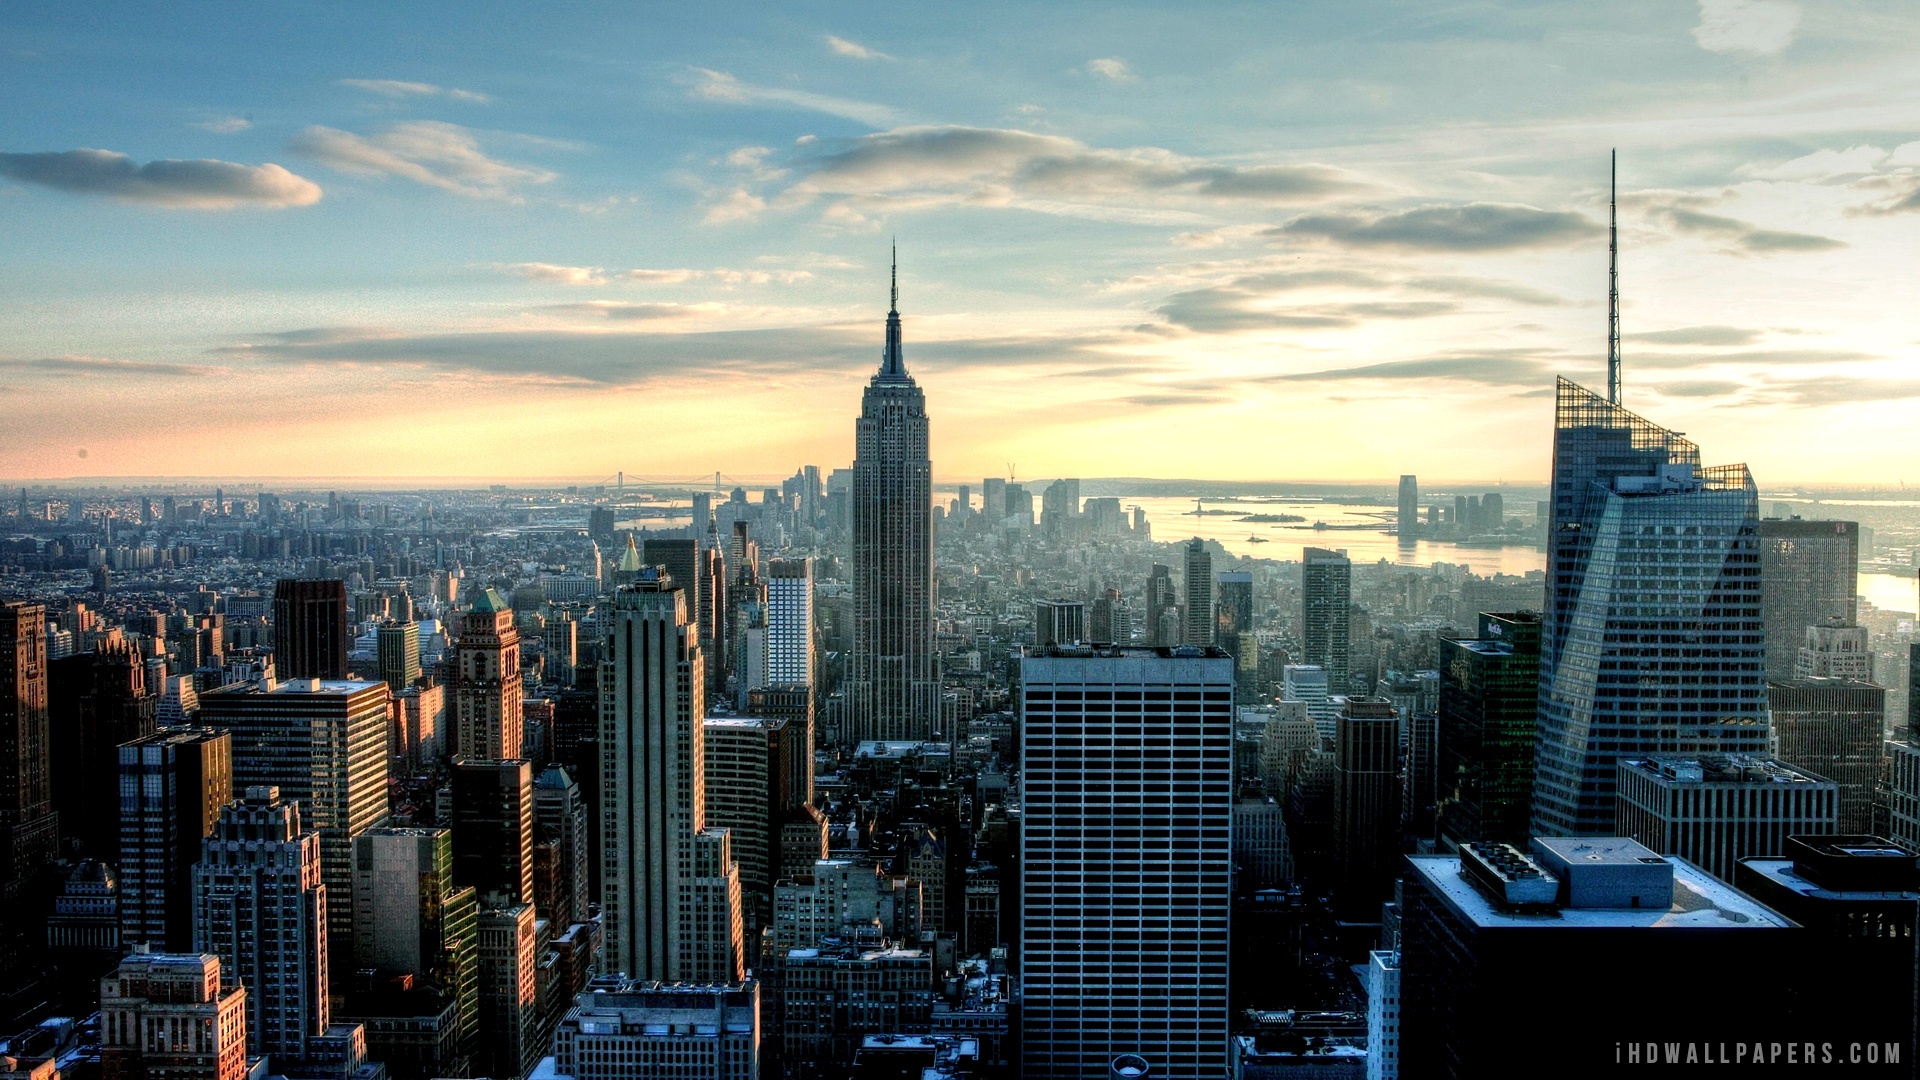  Download New York City WallpaperBackground in 1920x1080 HD